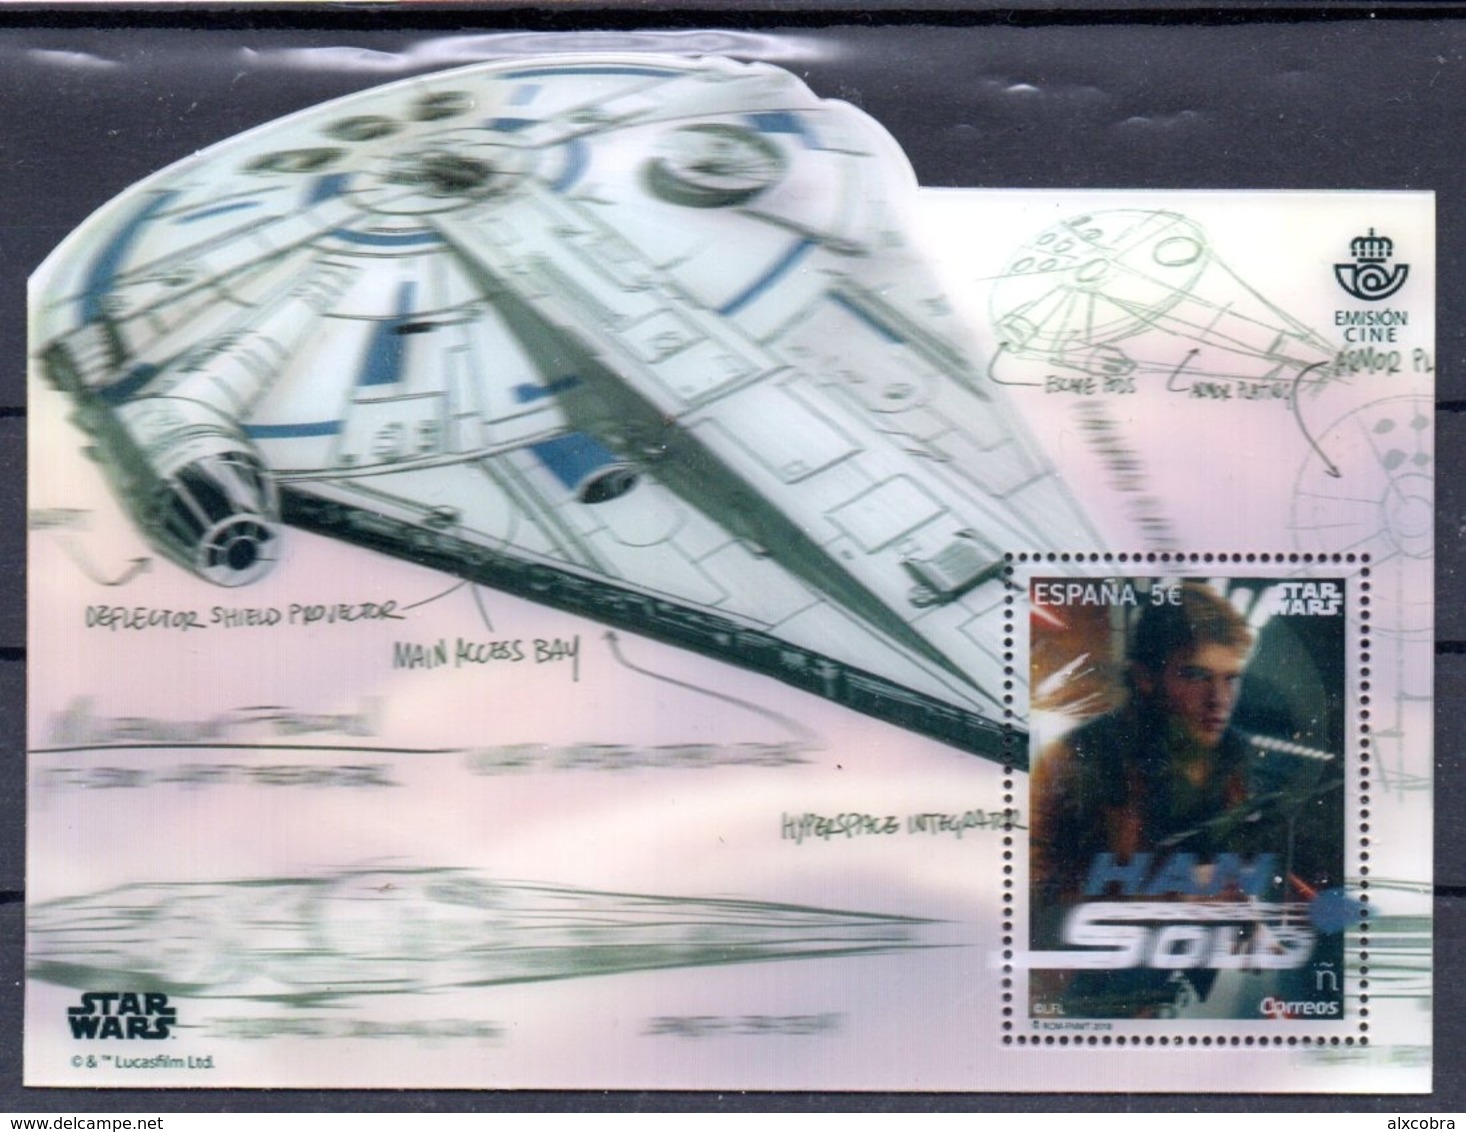 Spain Han Solo Star Wars 2018 M/S Holographic MNH - Hologramme